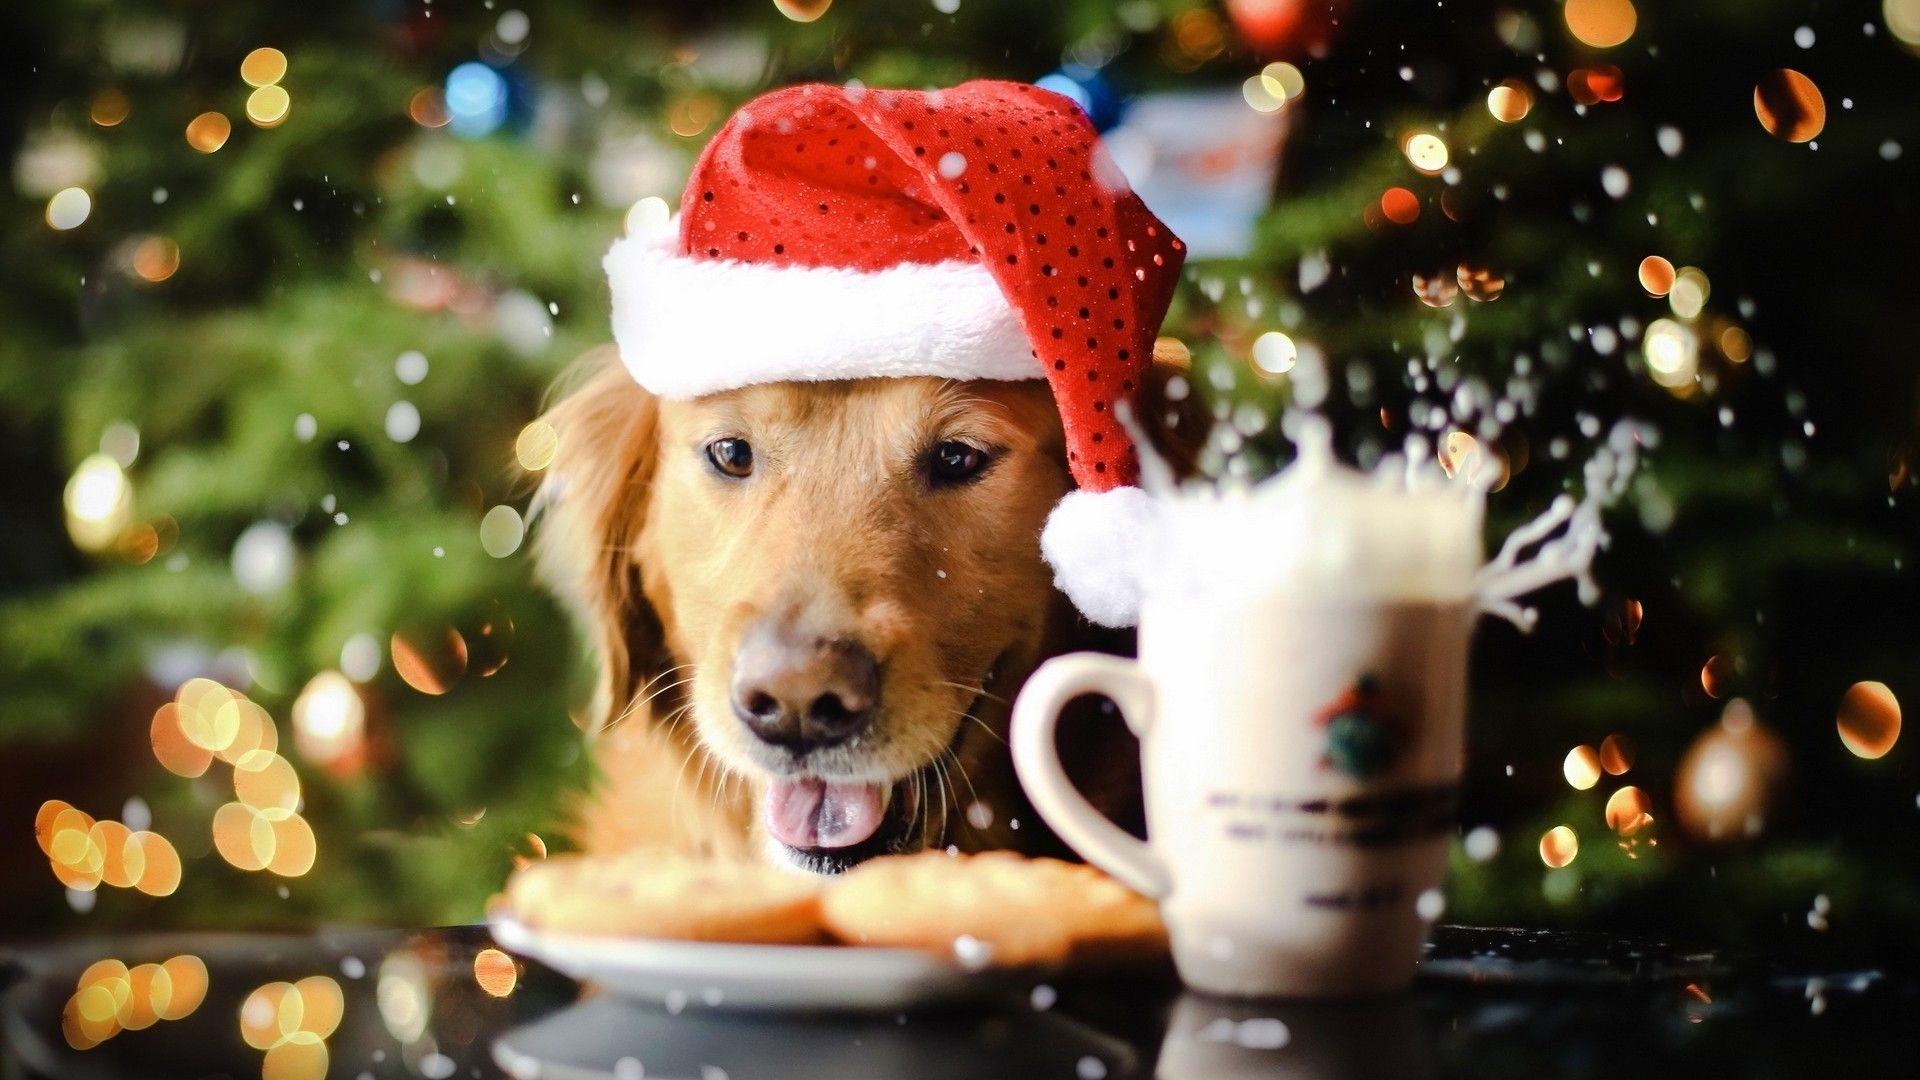 v.854: Christmas Dog Picture Wallpaper (1920x1080)